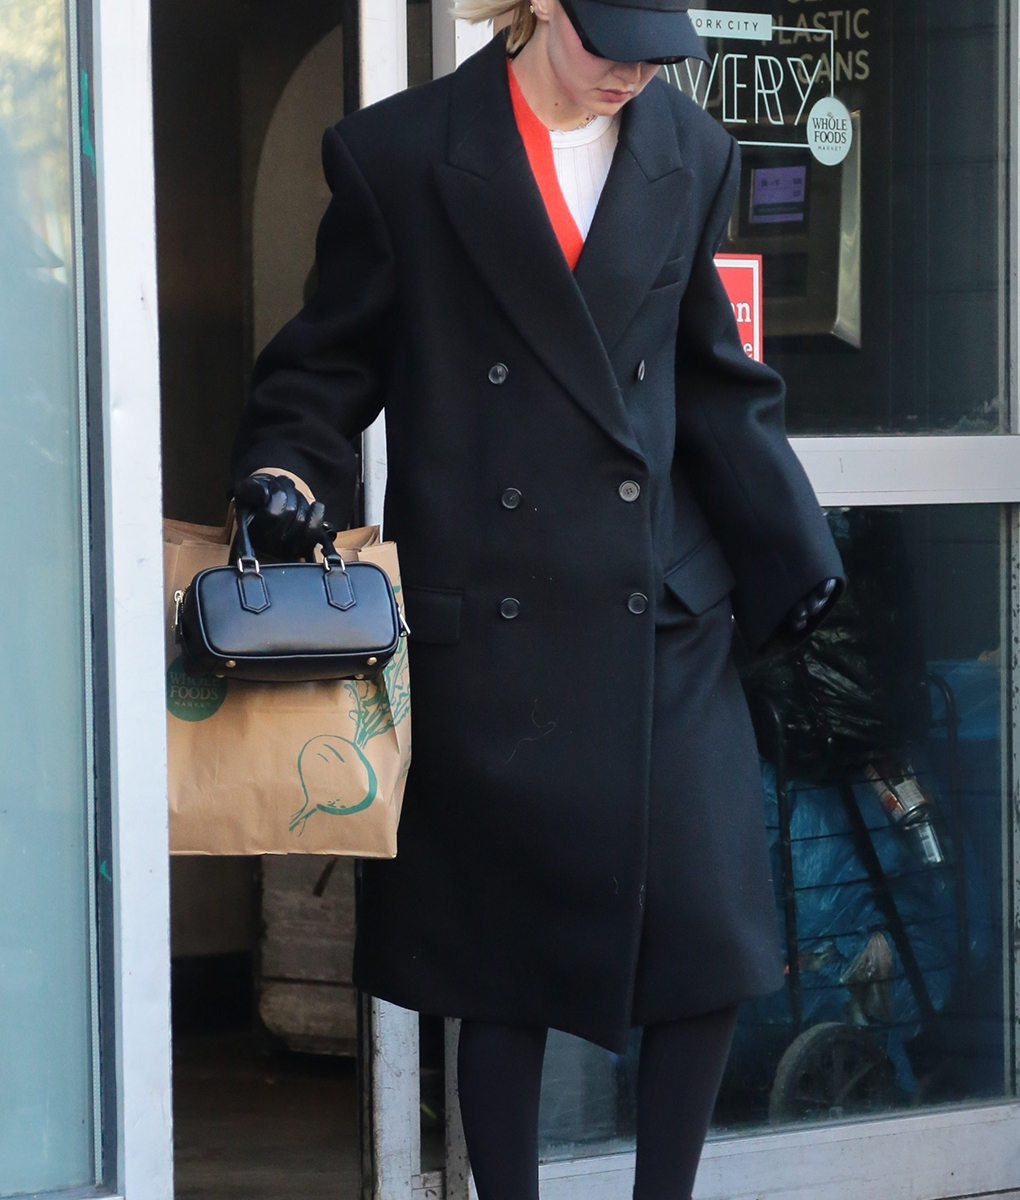 Gigi Hadid spotted shopping at Whole Foods in SoHo, NYC